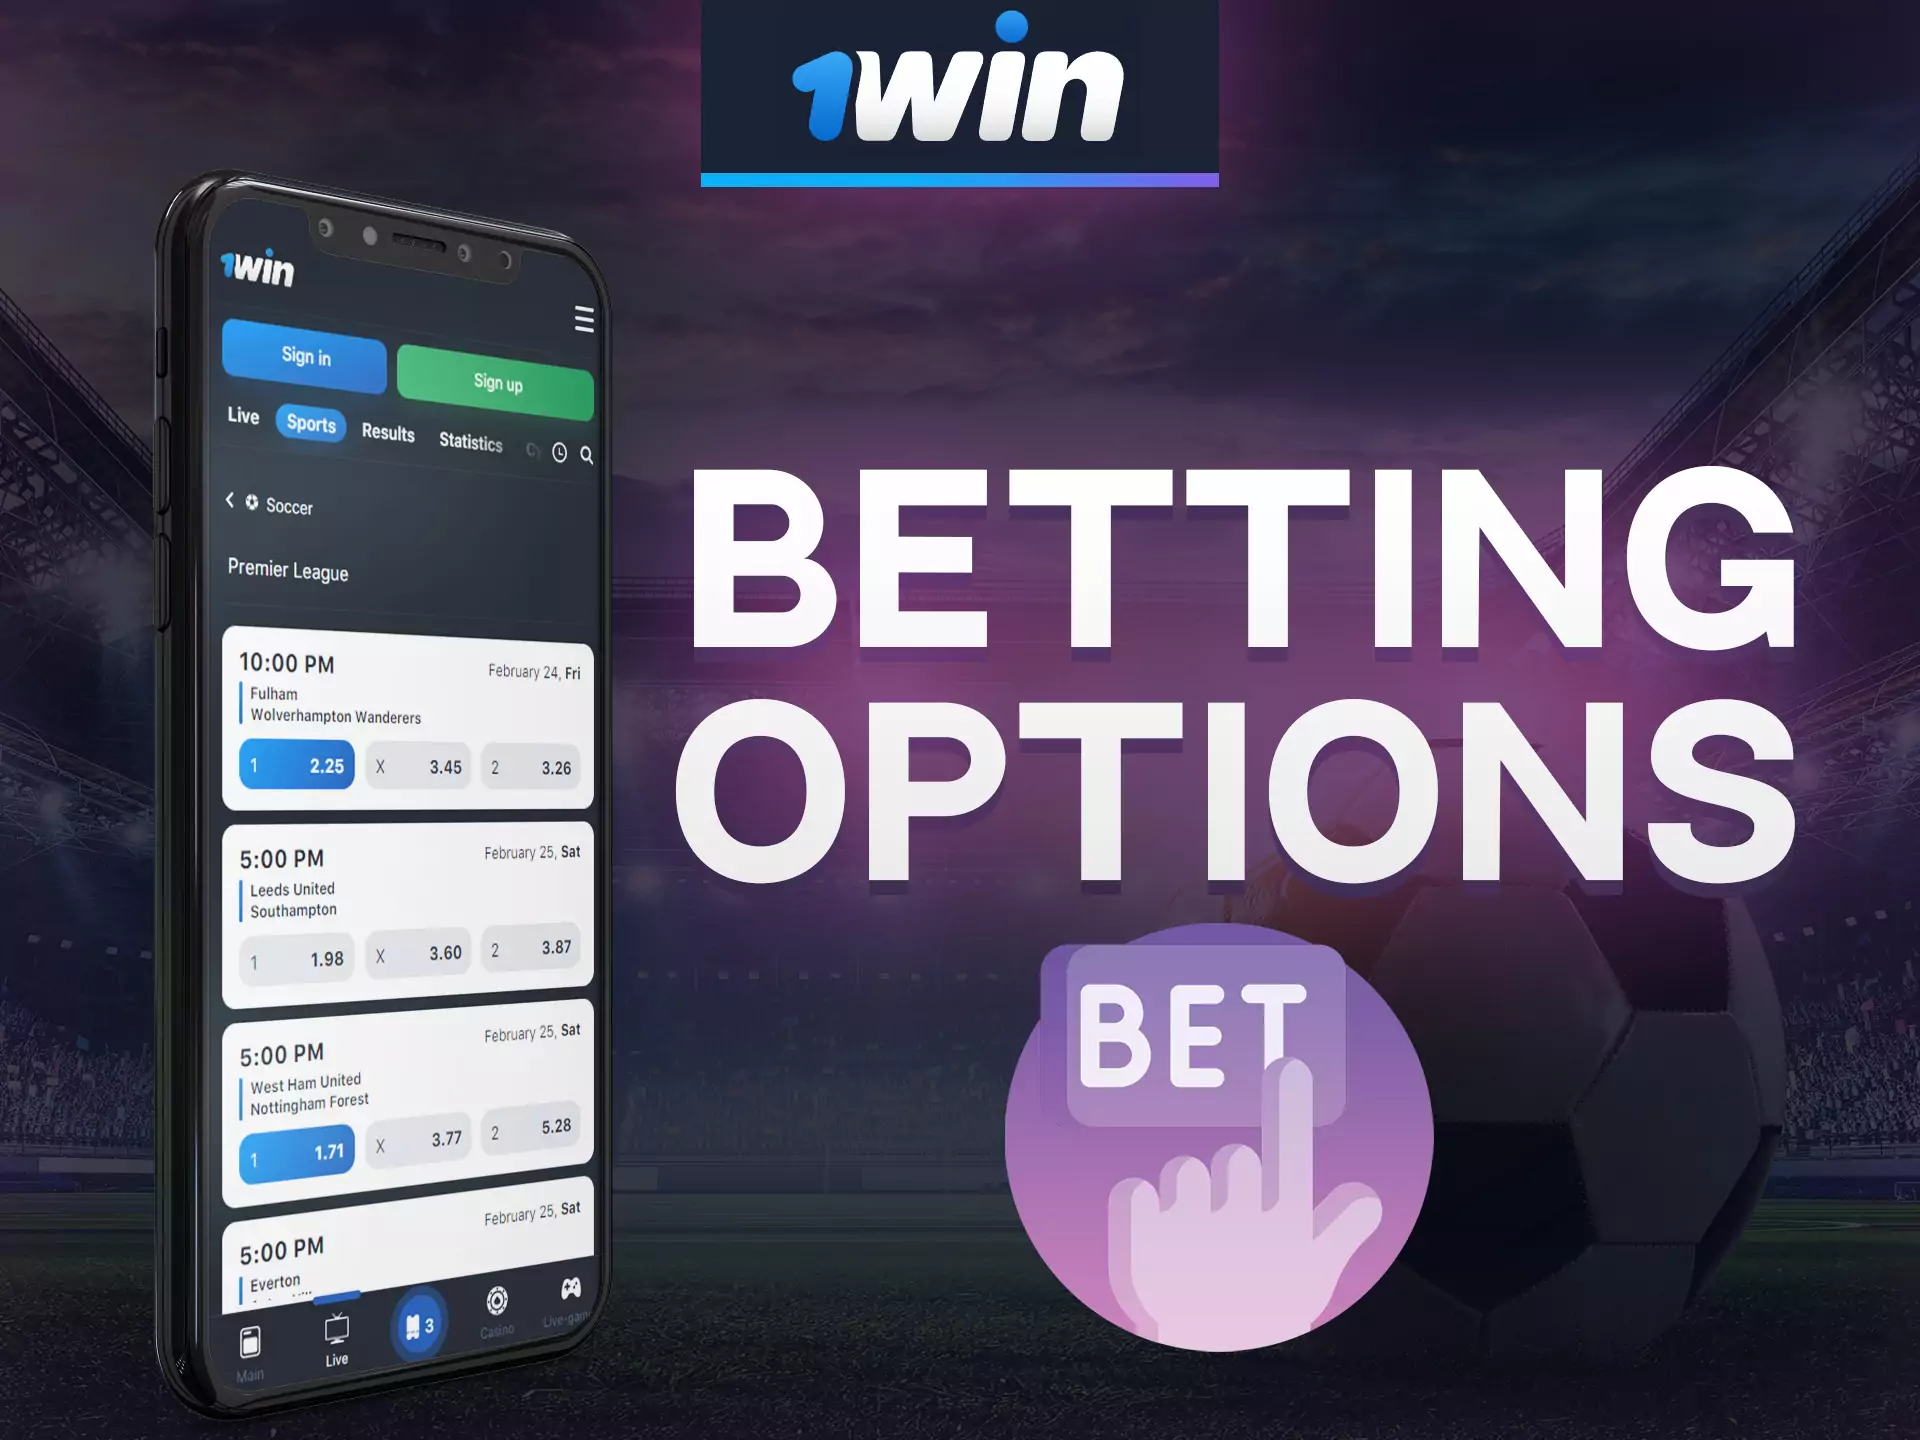 Bet how you want with 1win app.